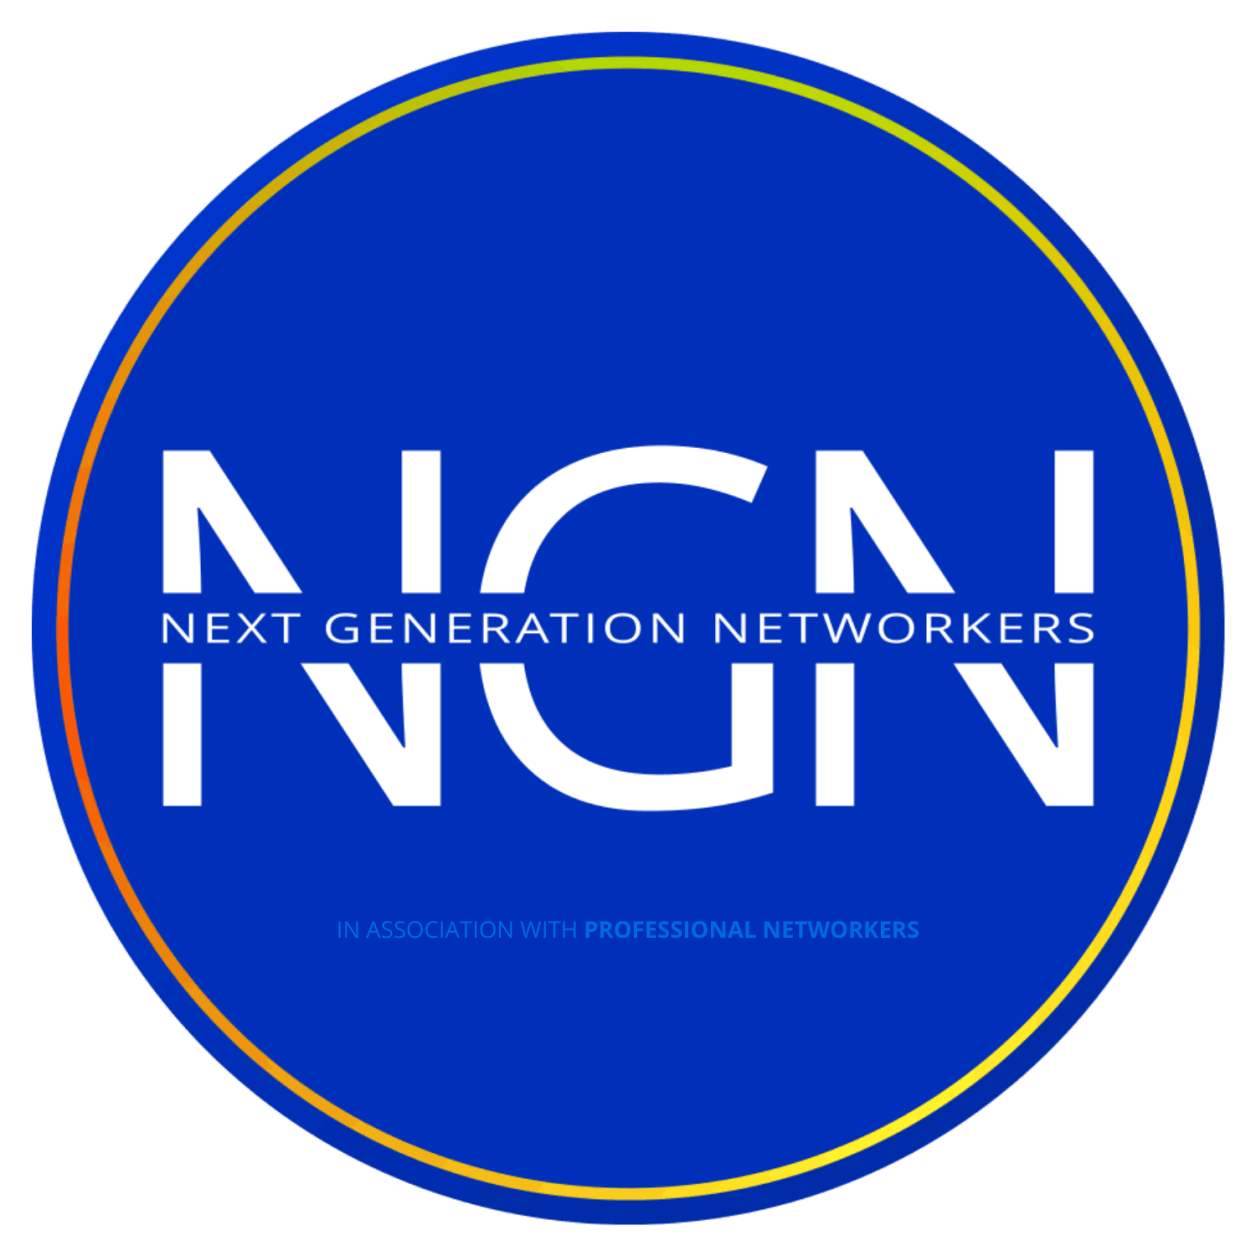 Next Generation Networkers